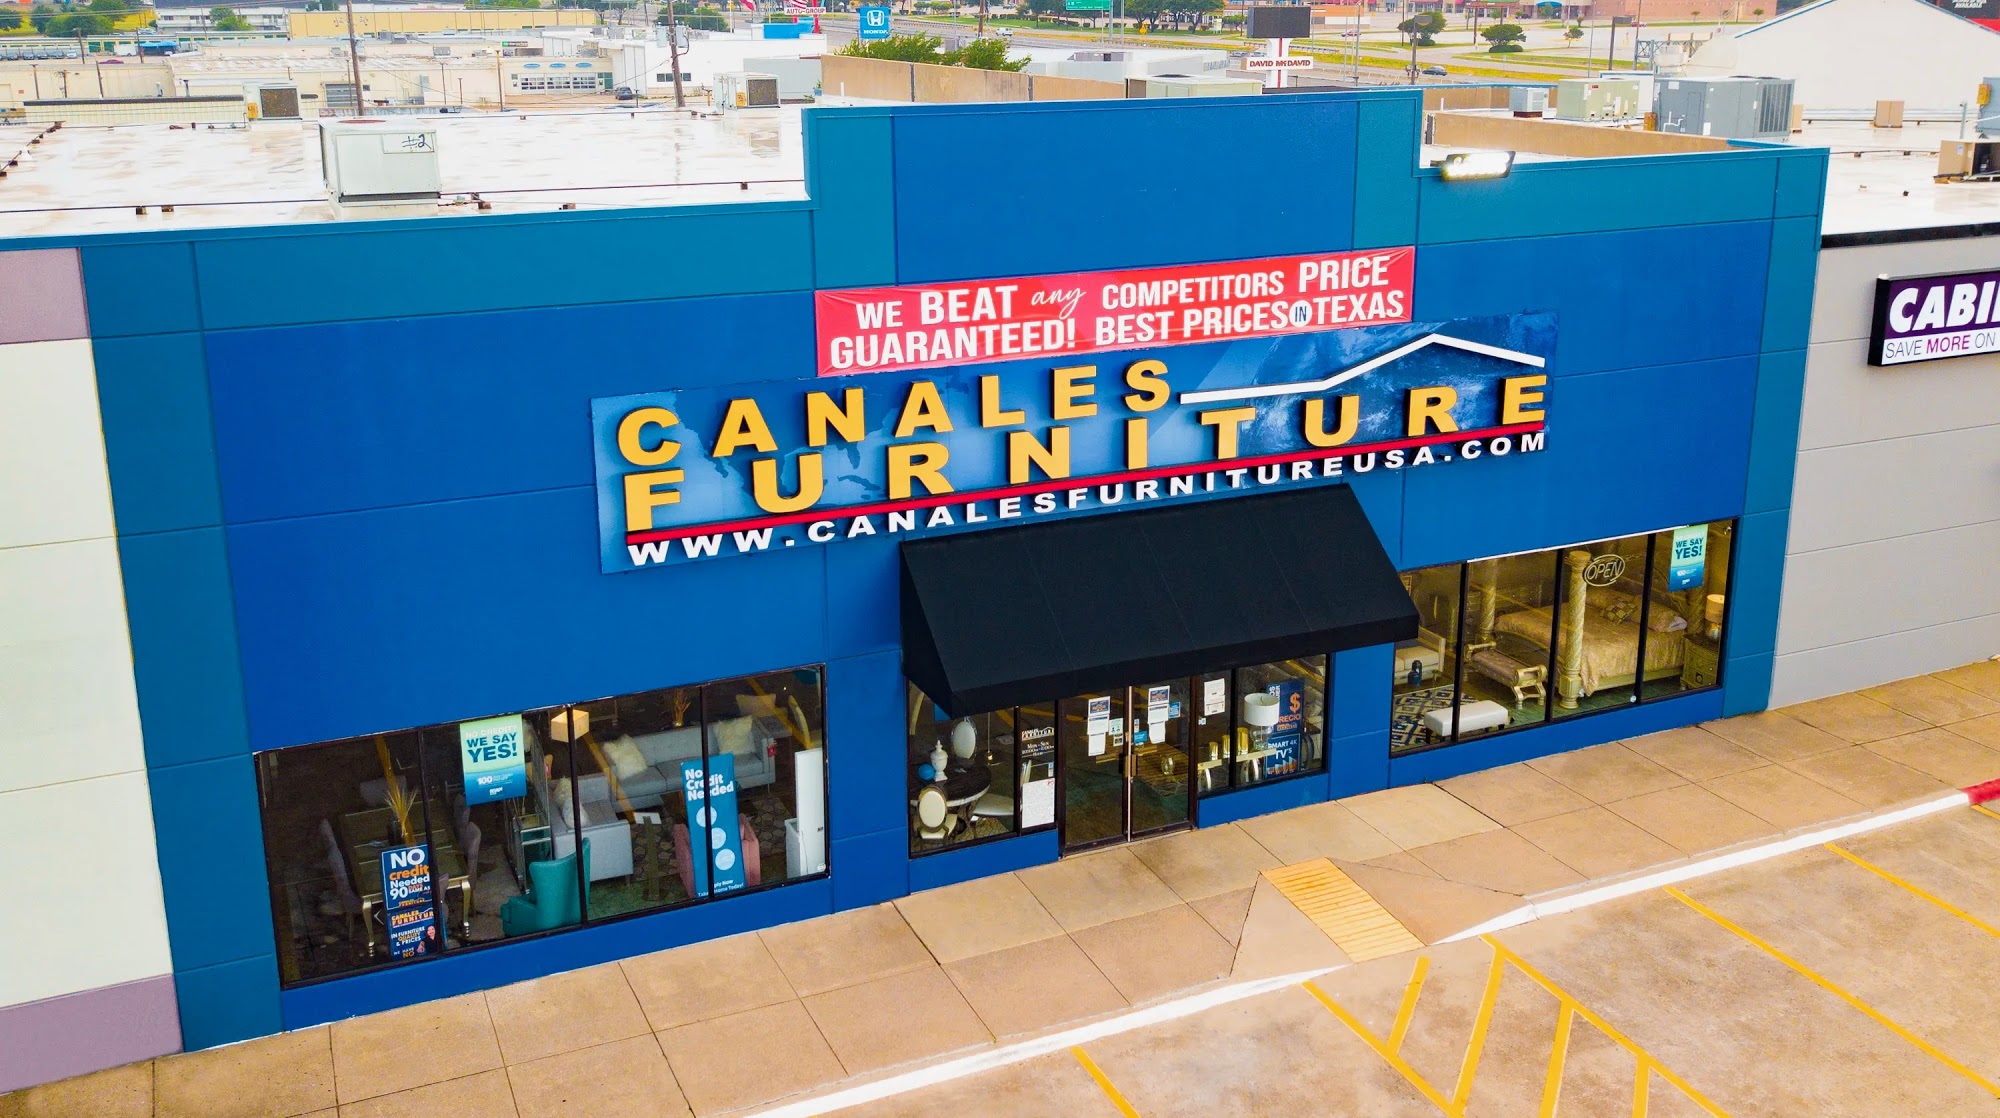 Canales Furniture